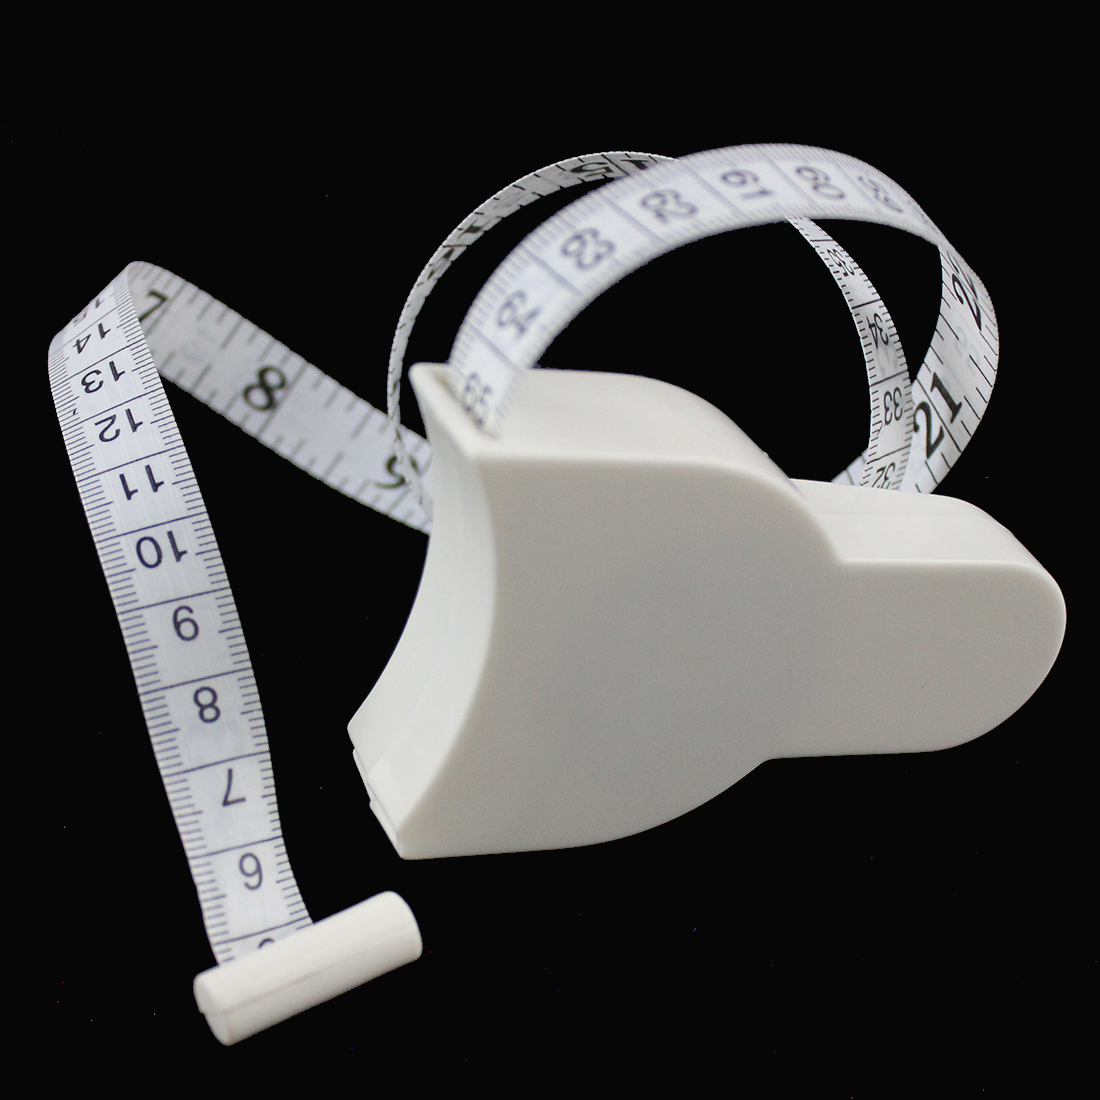 Fitness Accurate Body Fat Caliper Measuring Body Tape Ruler Measure Tape Measure Body Fat Caliper 150cm/ 60 Inch for Arm/ Chest